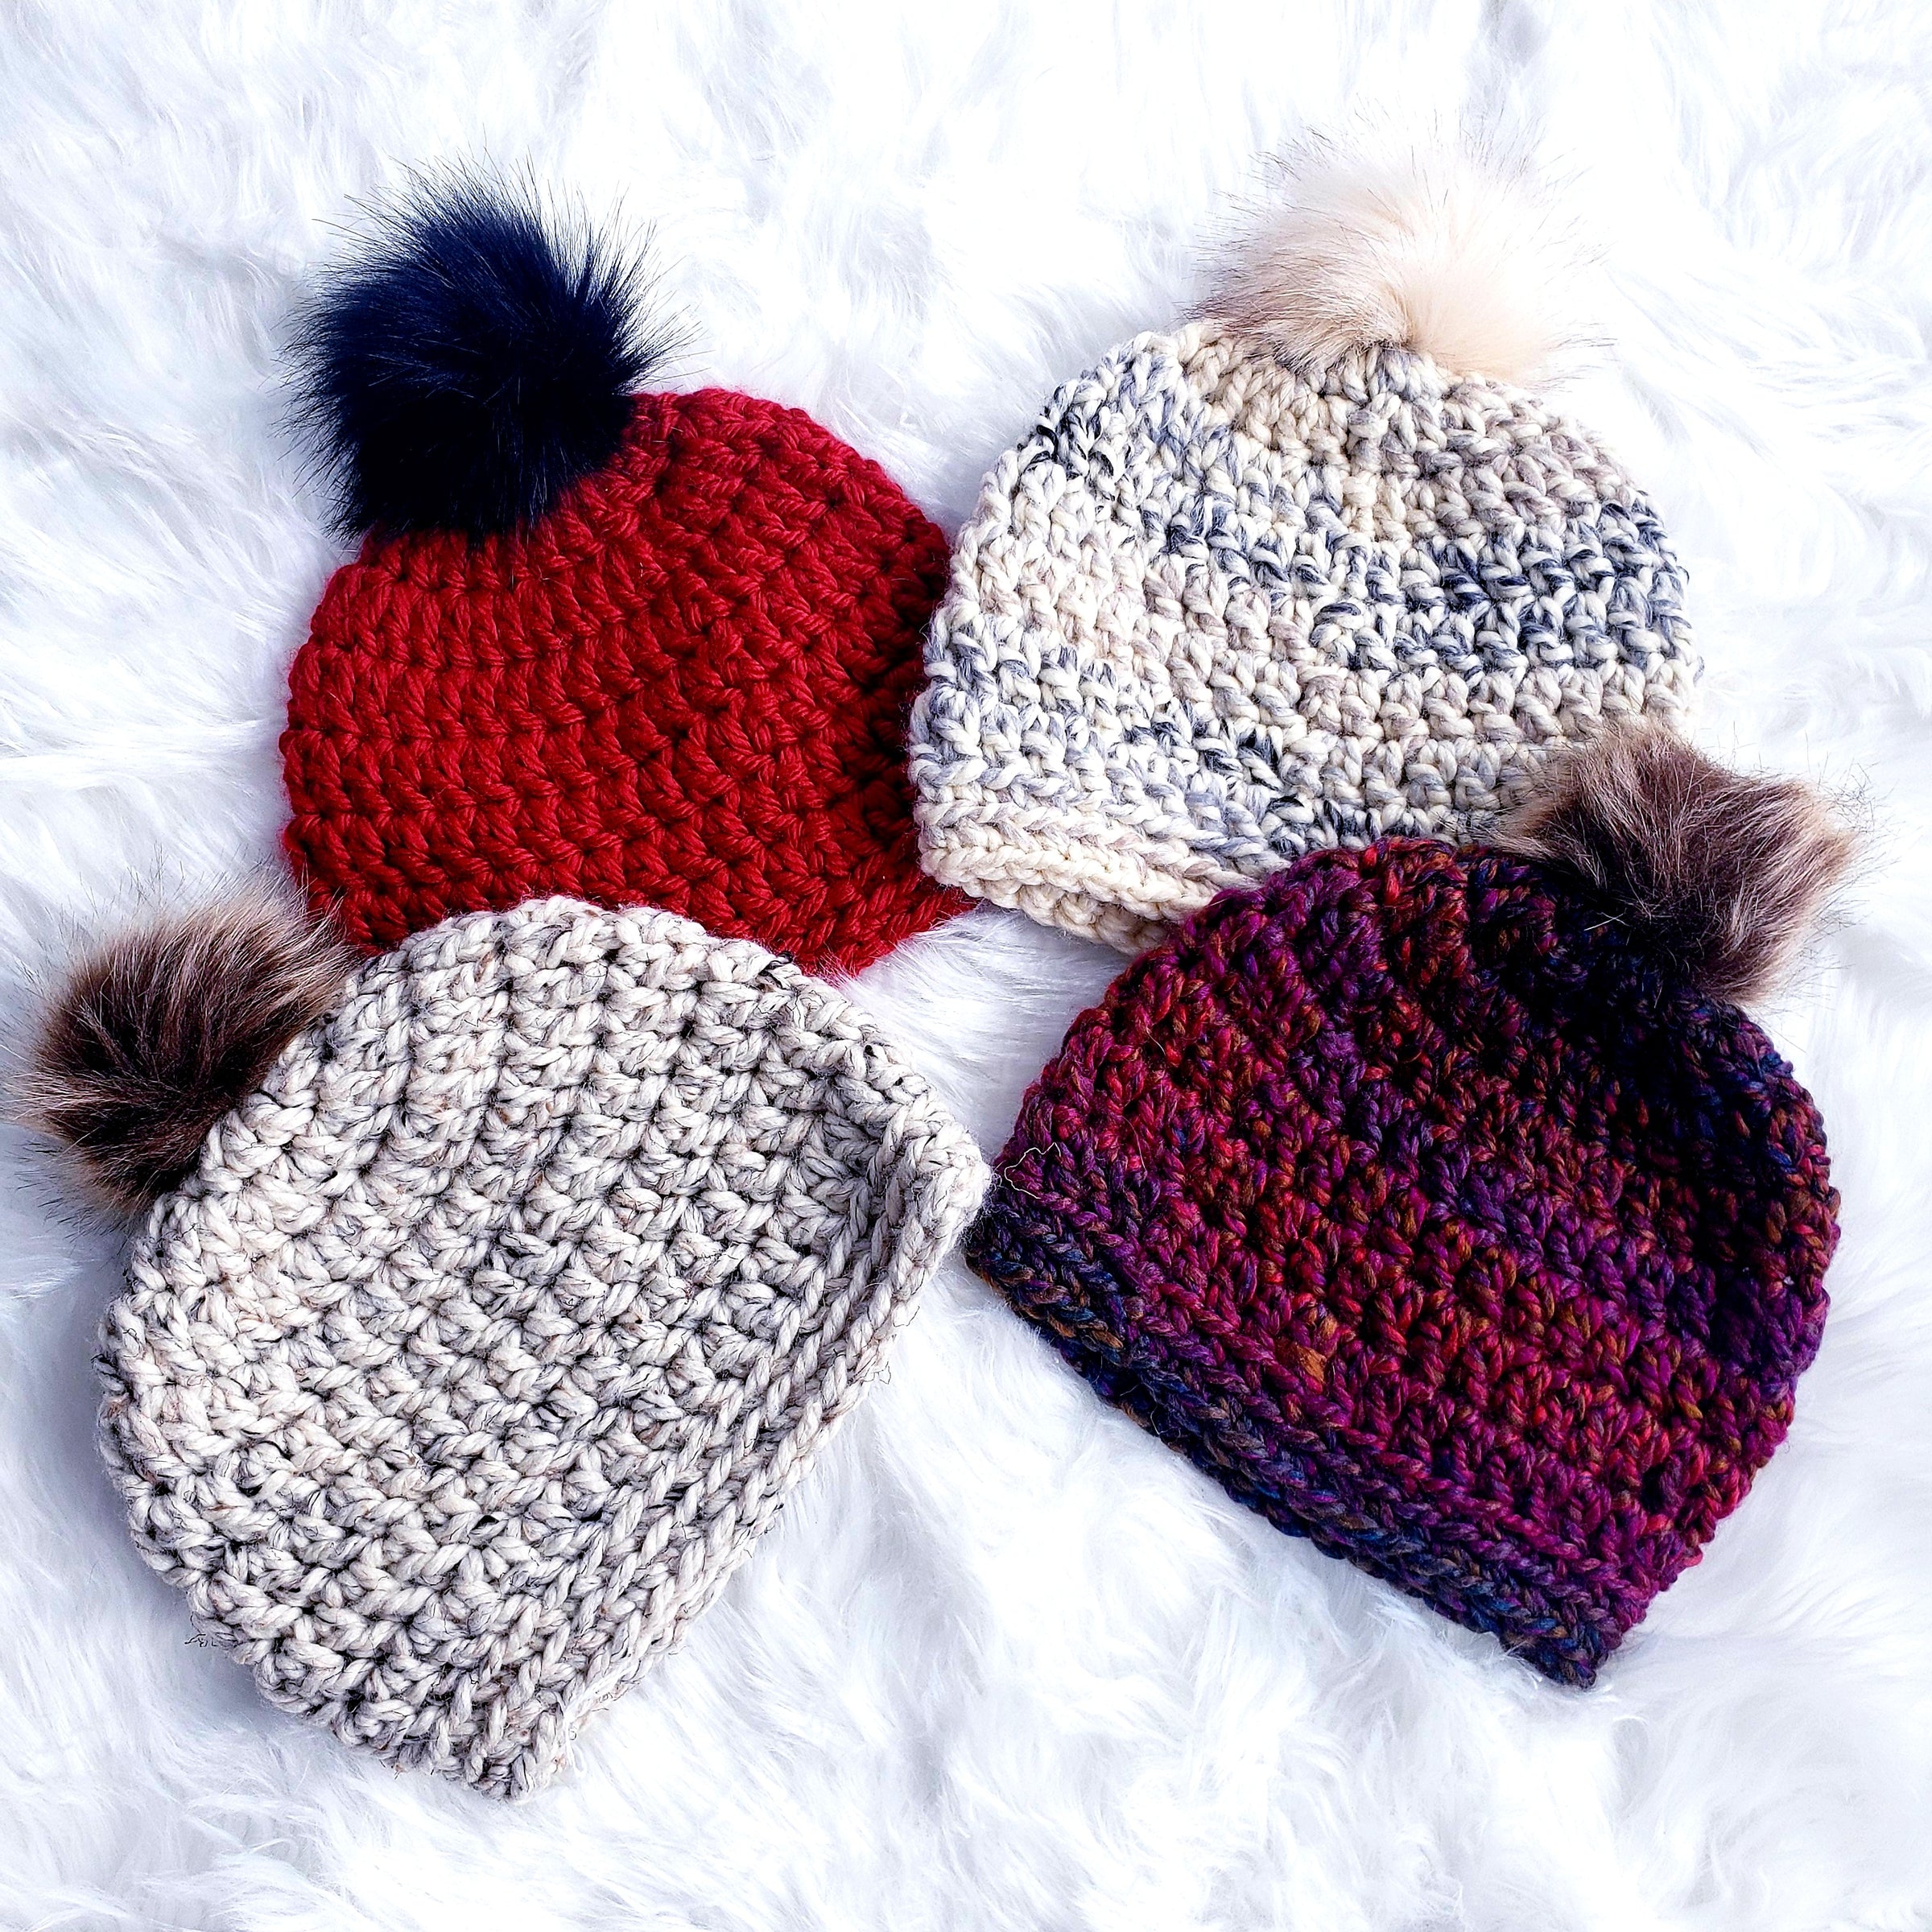 CROCHETED ADULT WINTER HATS